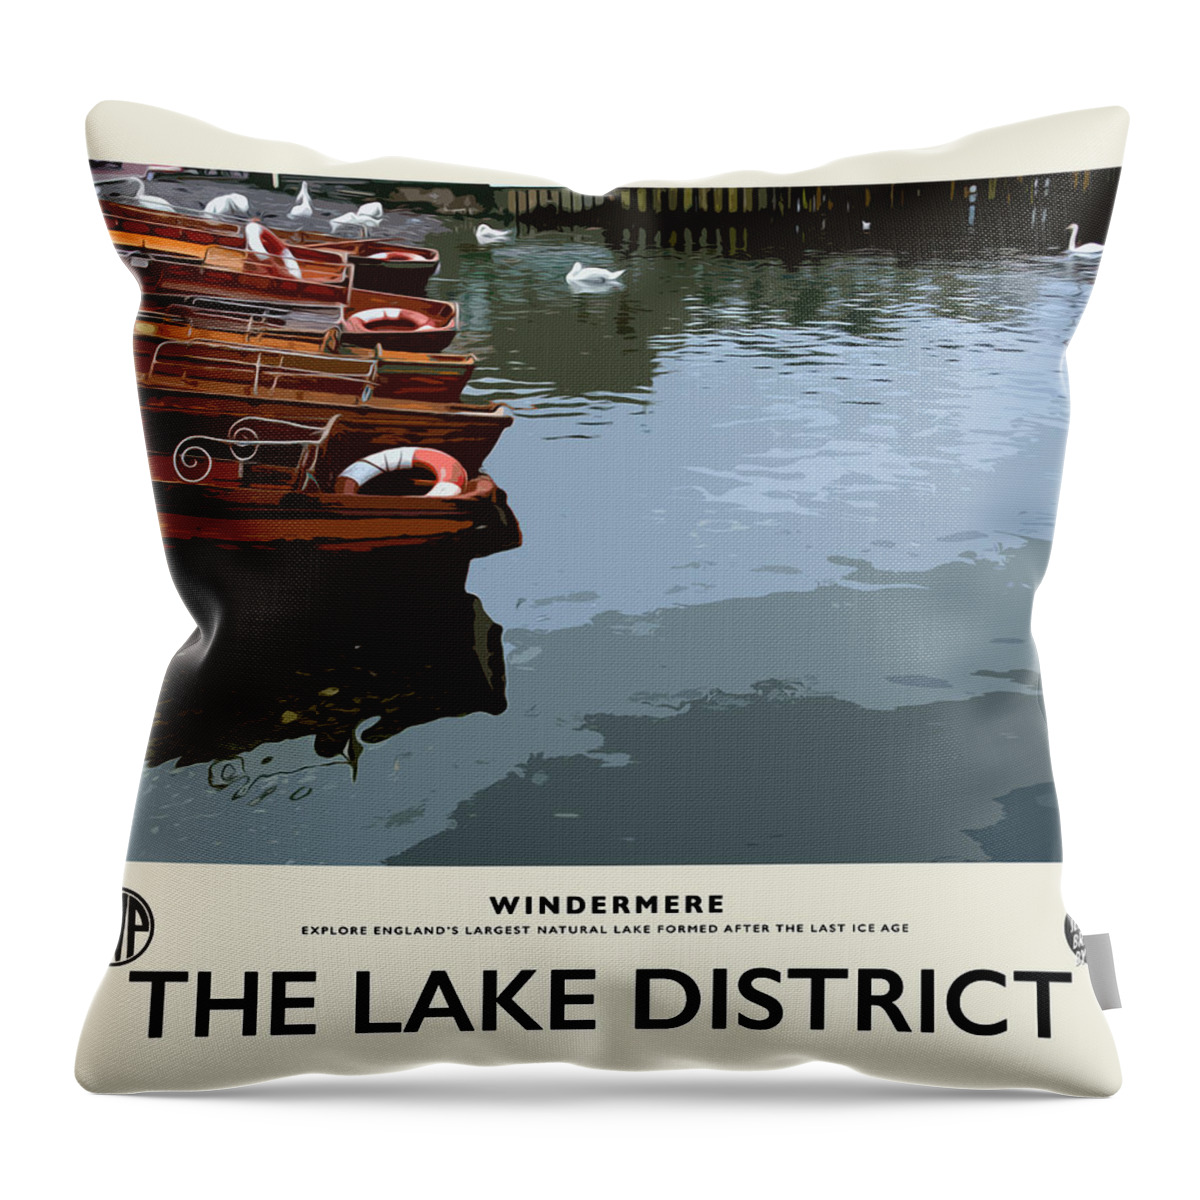 Lake Windermere Throw Pillow featuring the photograph Windermere Swans Cream Railway Poster by Brian Watt